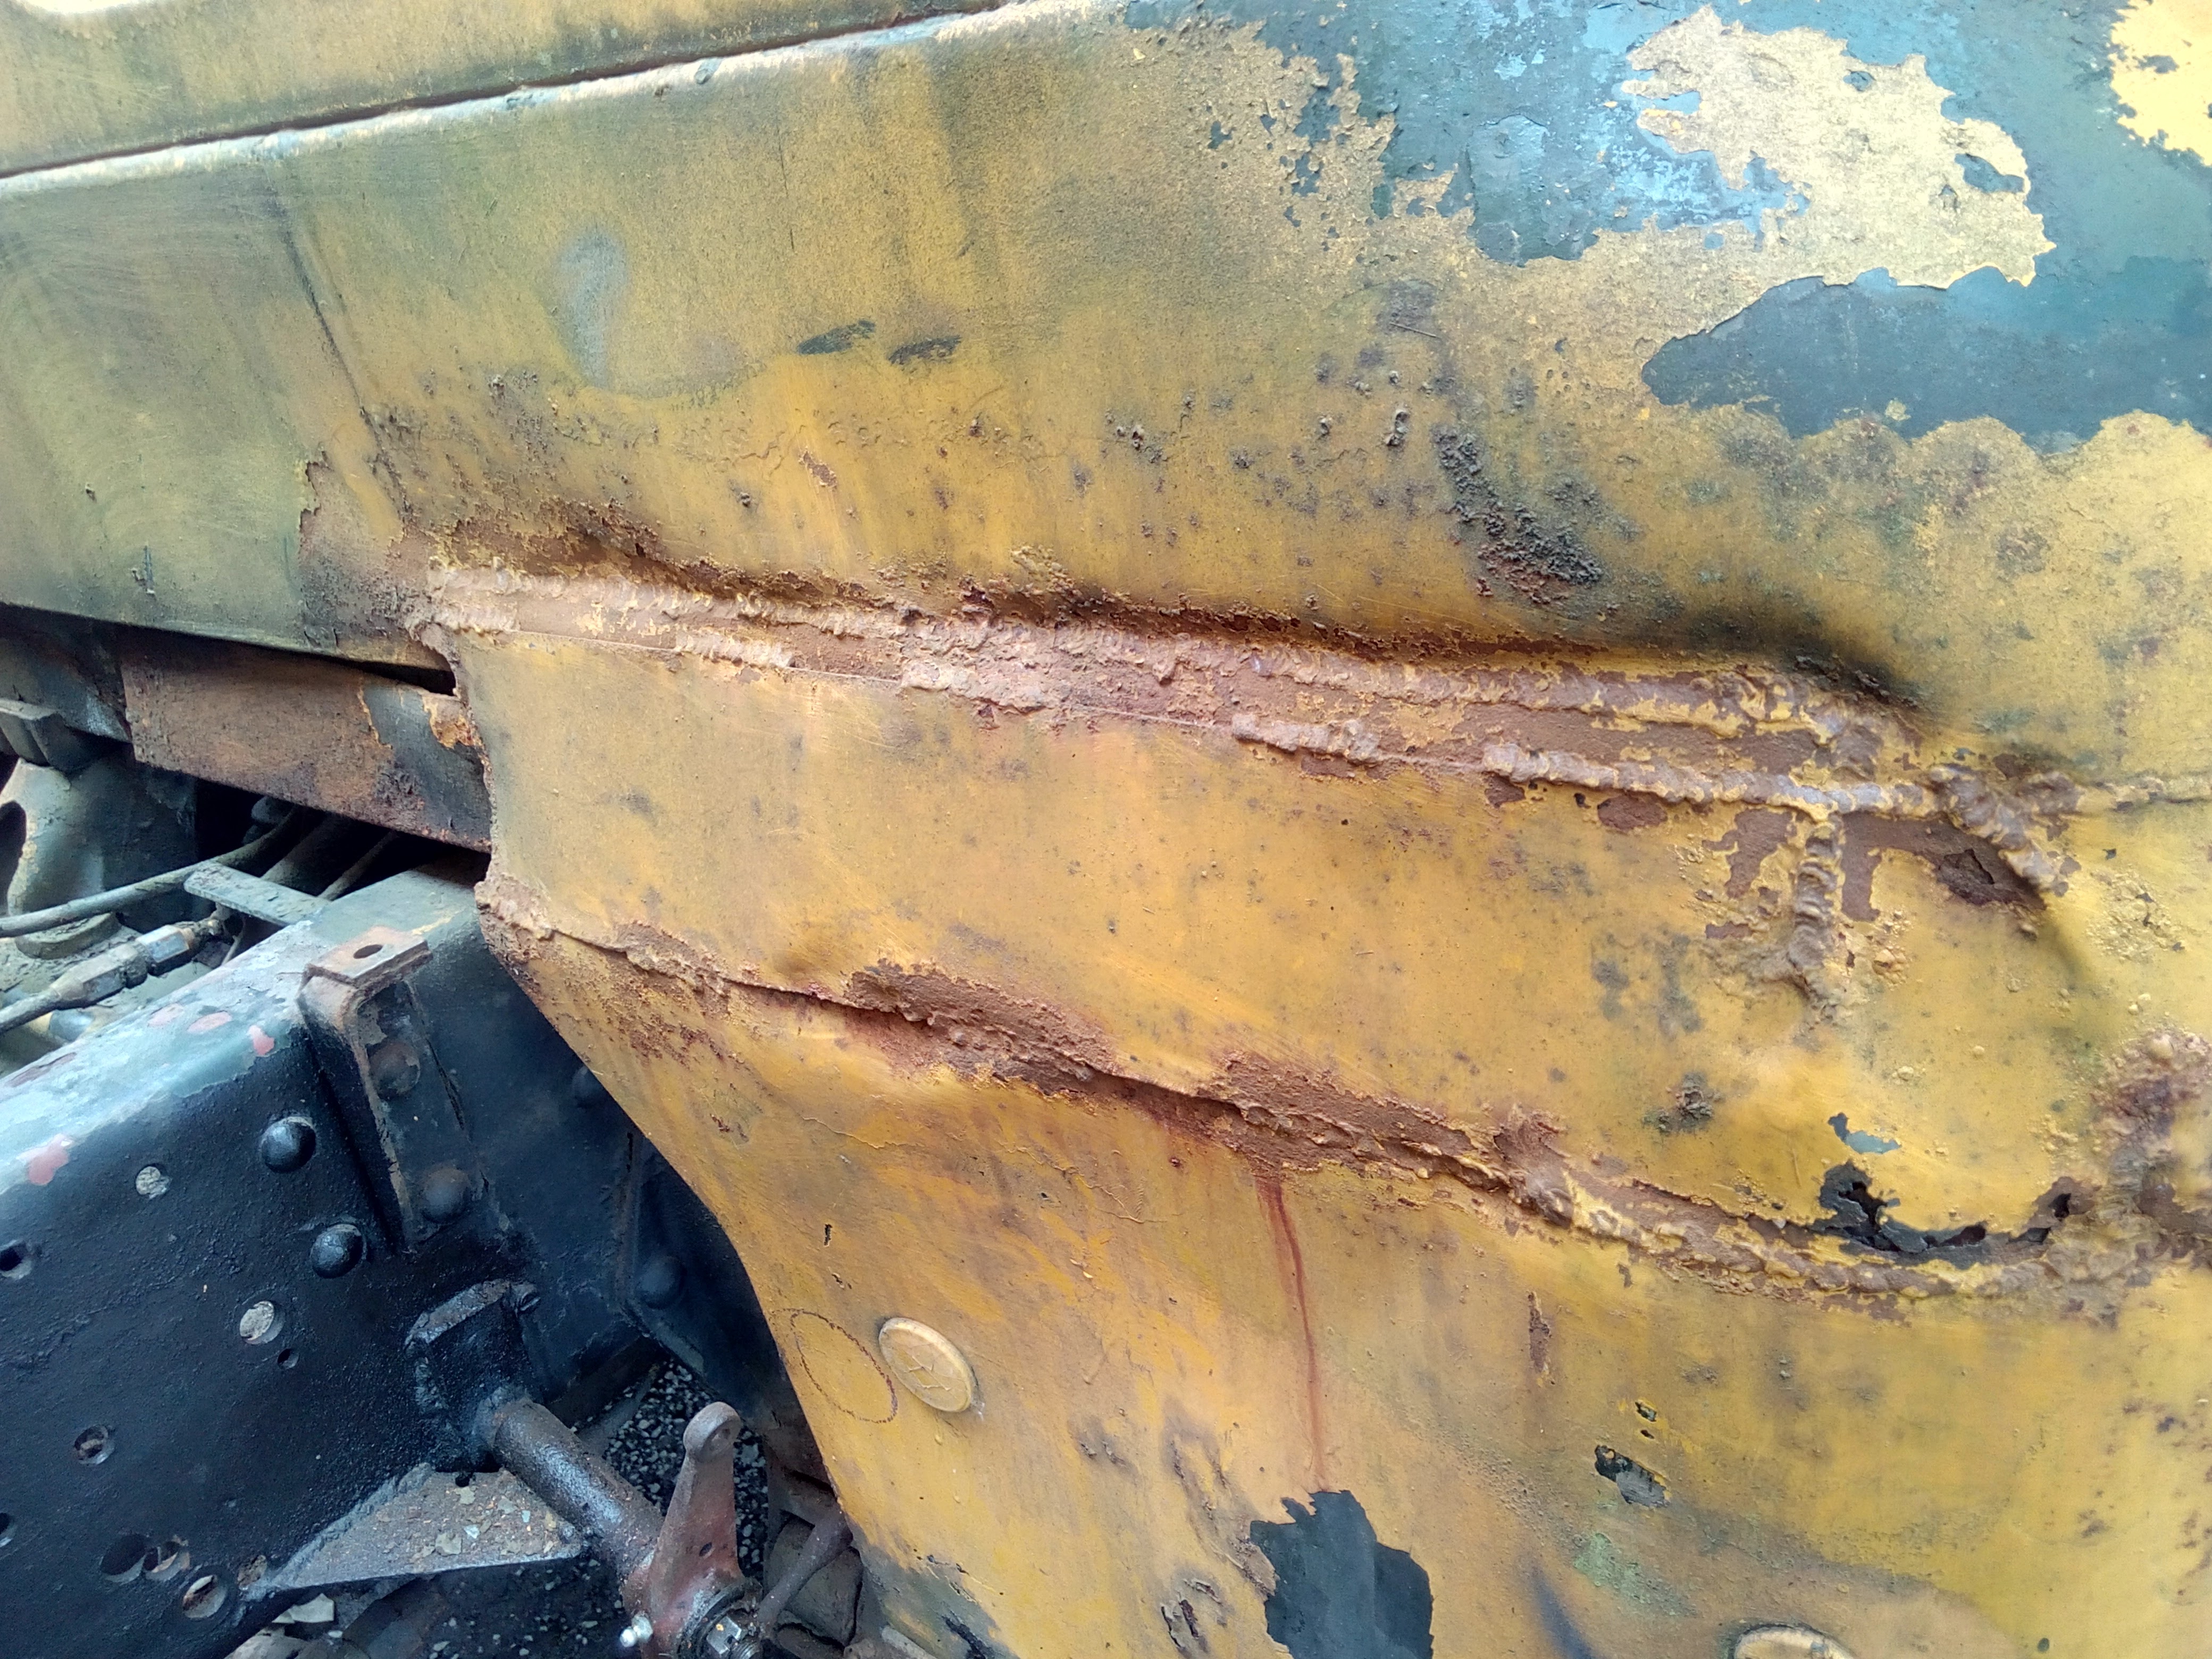 Photo of the back of the cab, showing a very large repair patch
that has been brazed in and signs of other crude repairs.